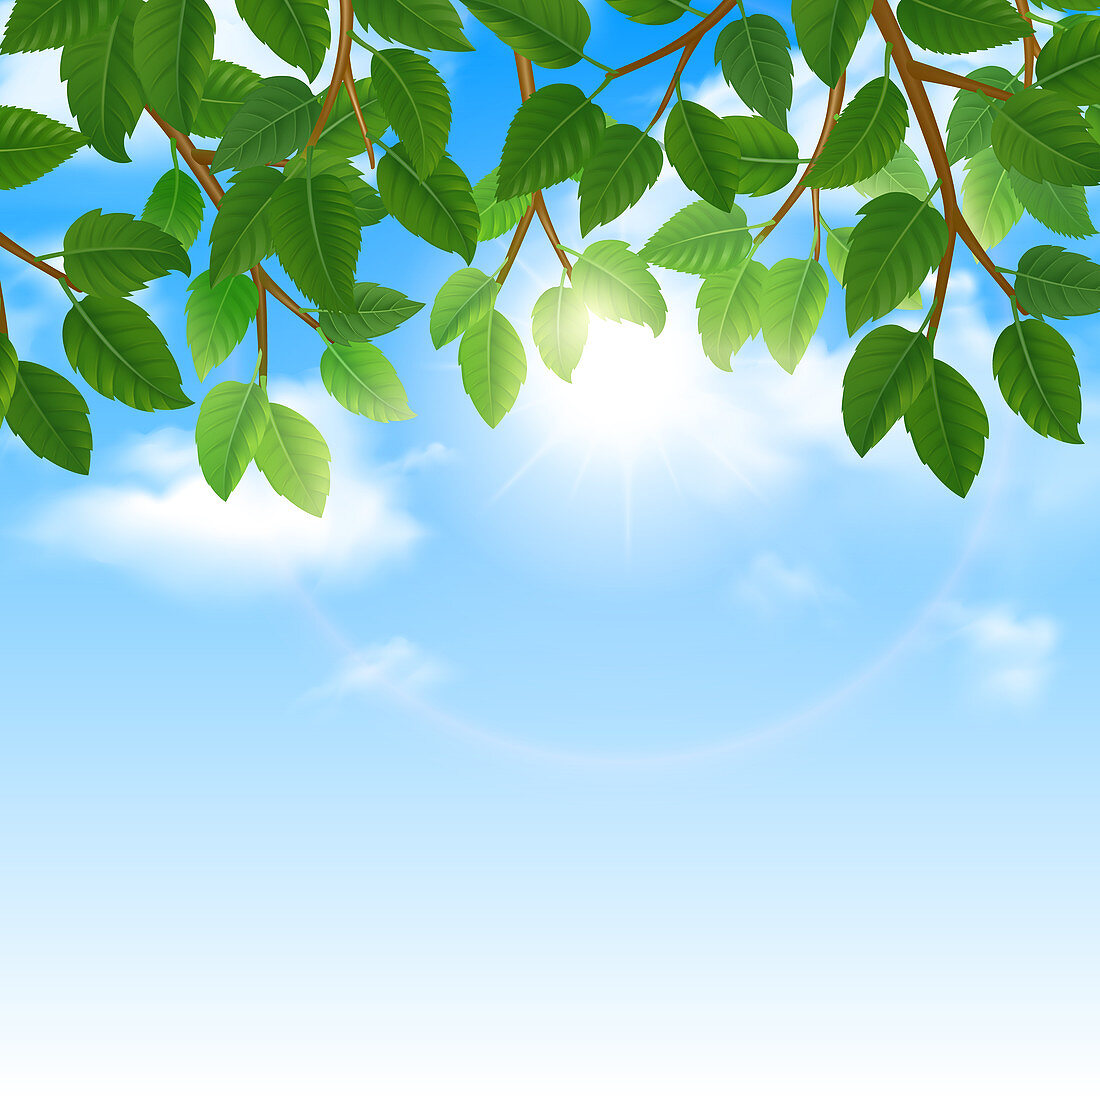 Blue sky and tree branches, illustration